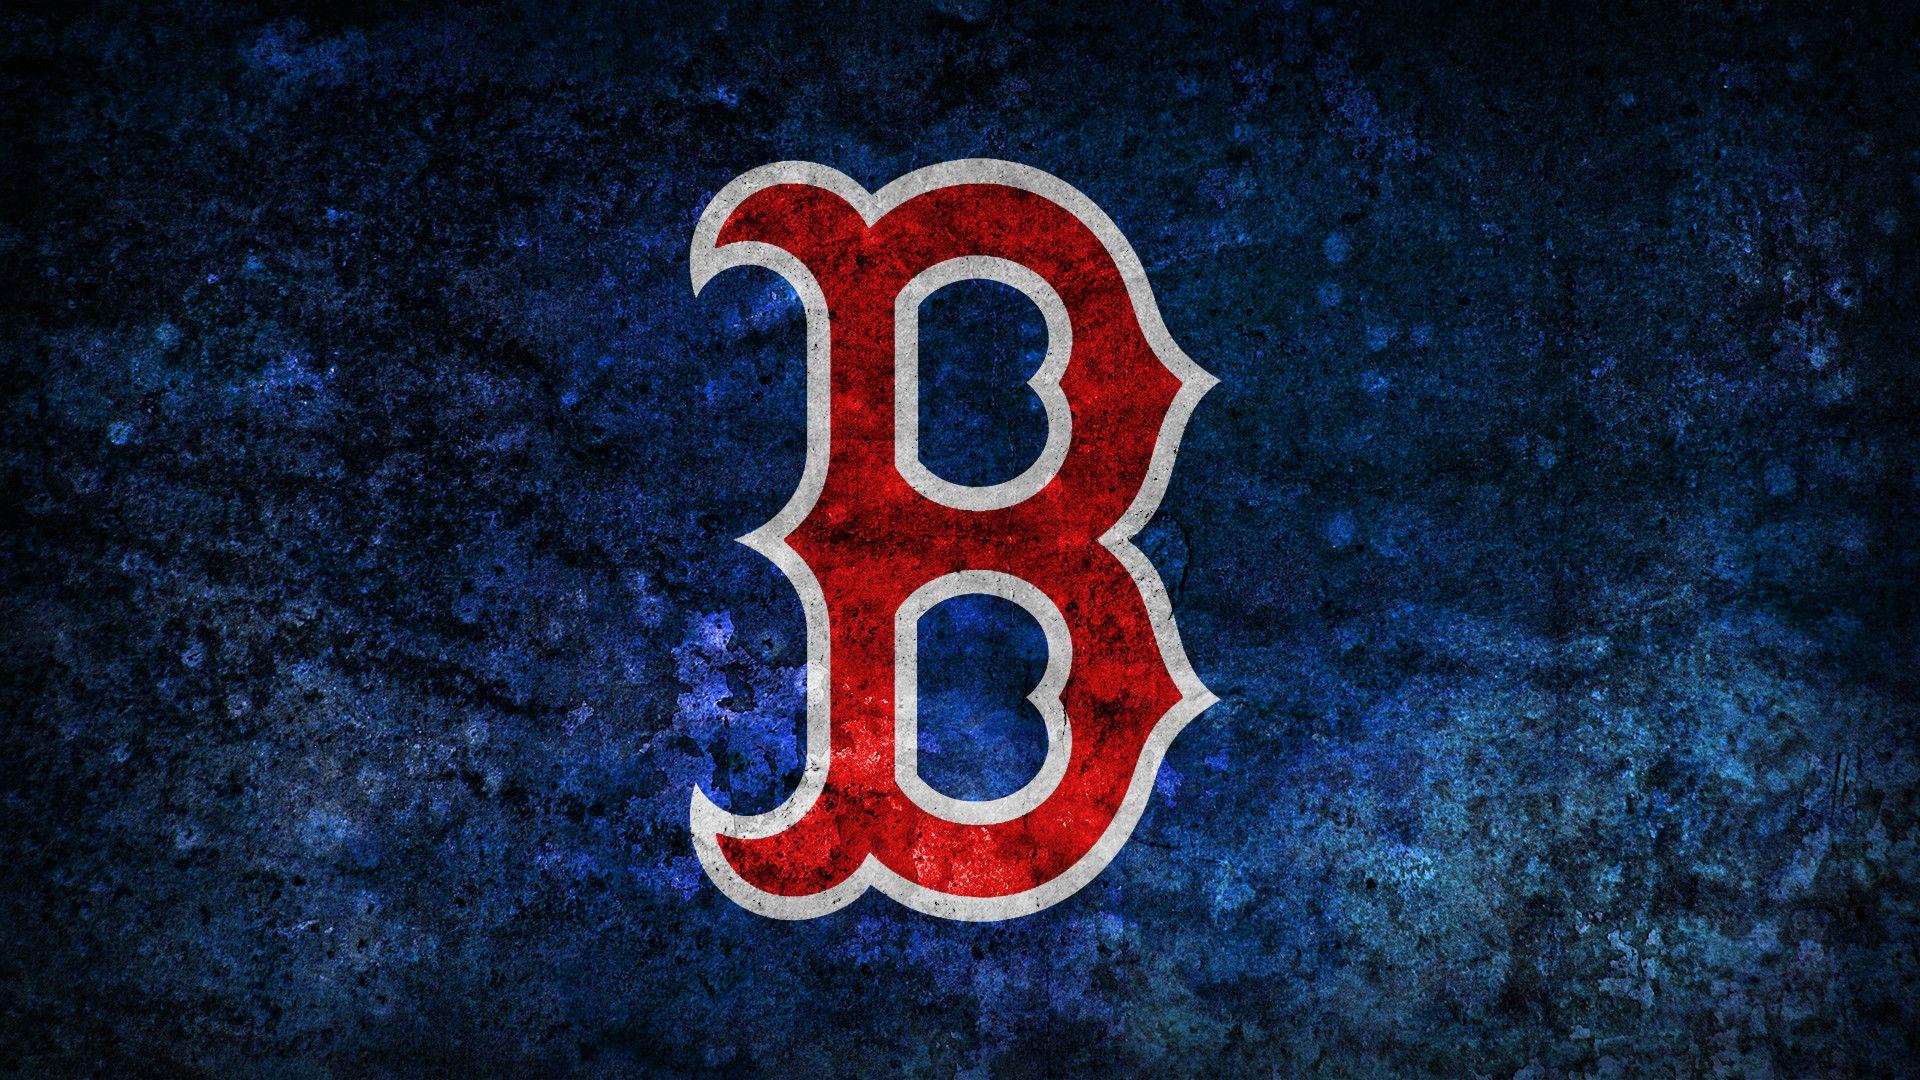 2023 Boston Red Sox wallpaper – Pro Sports Backgrounds